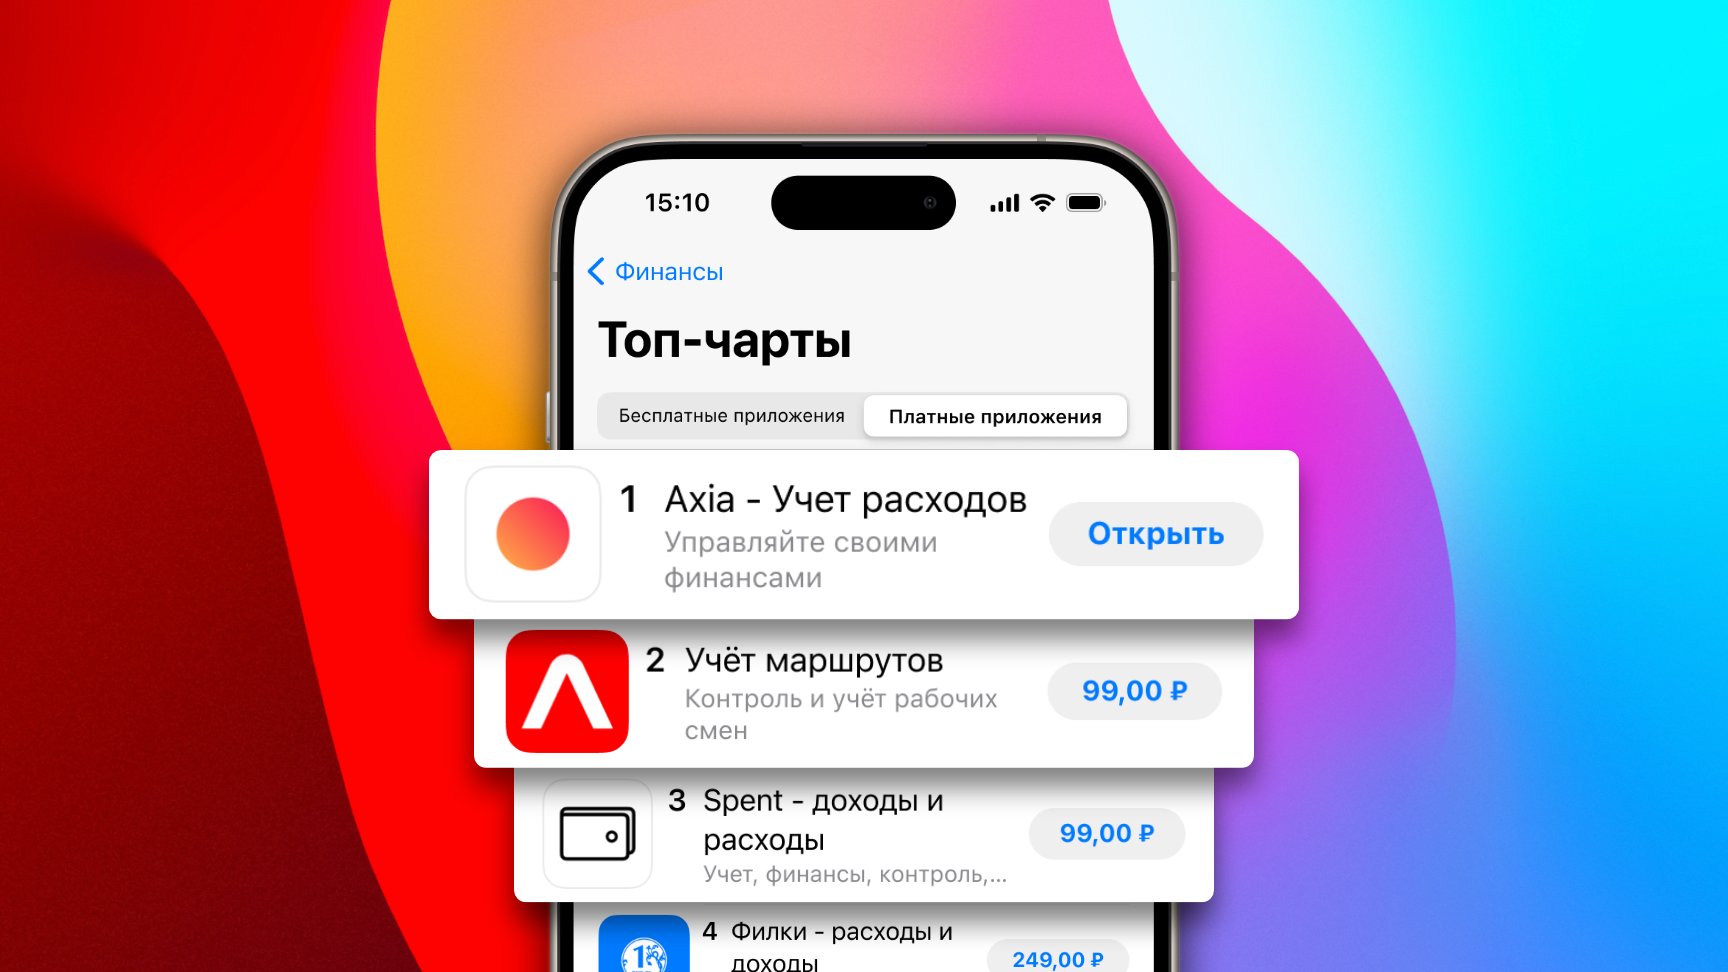 Axia became #1 in the Russian App Store